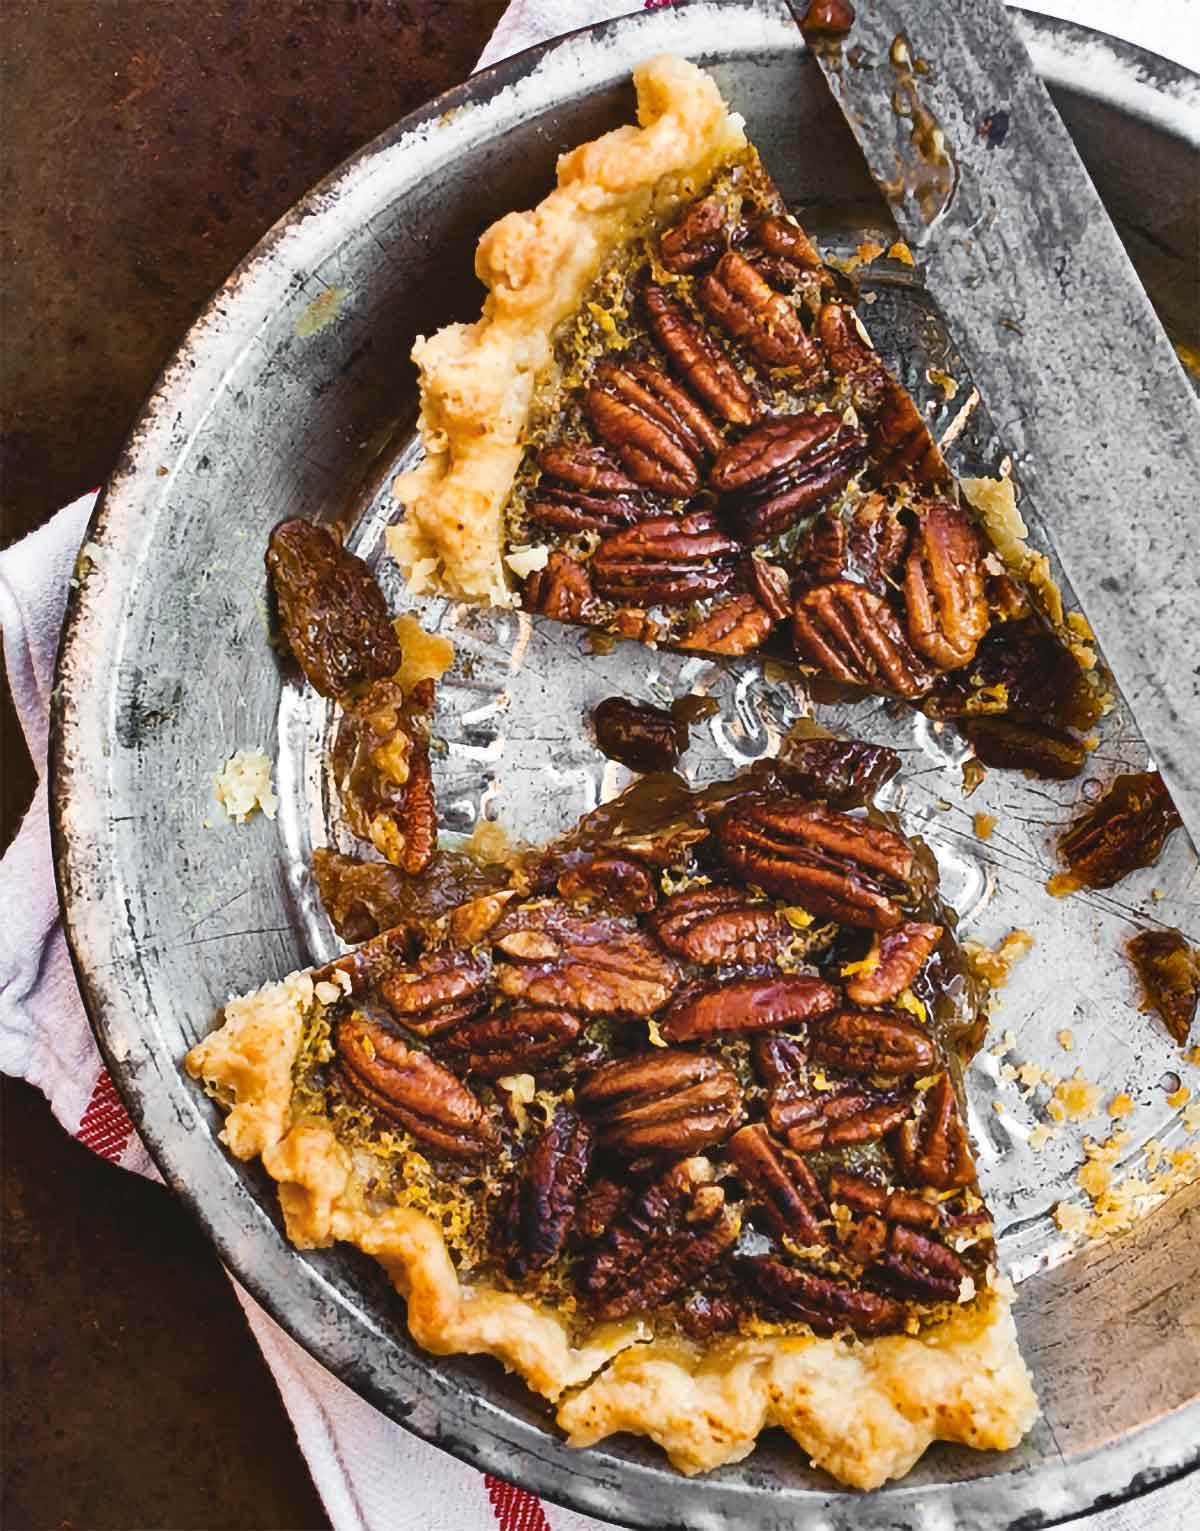 Two slices of spiced maple pecan pie in a metal pie plate on a kitchen towel.